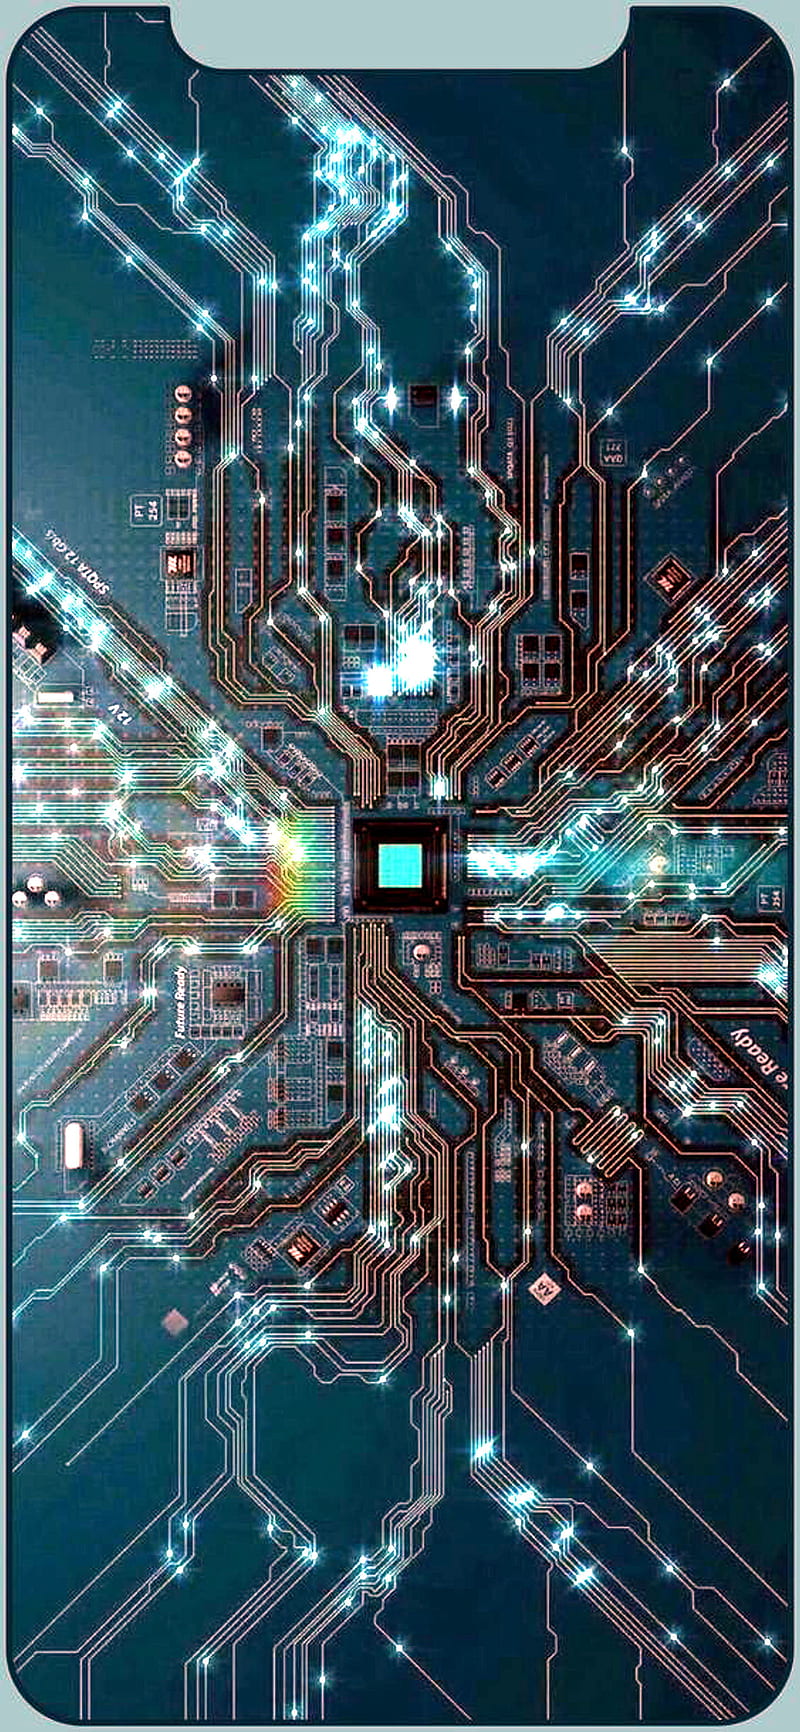 Futuristic Printed Circuit Board With Electronic Chip Components Wallpaper  3d Illustration Stock Photo  Download Image Now  iStock